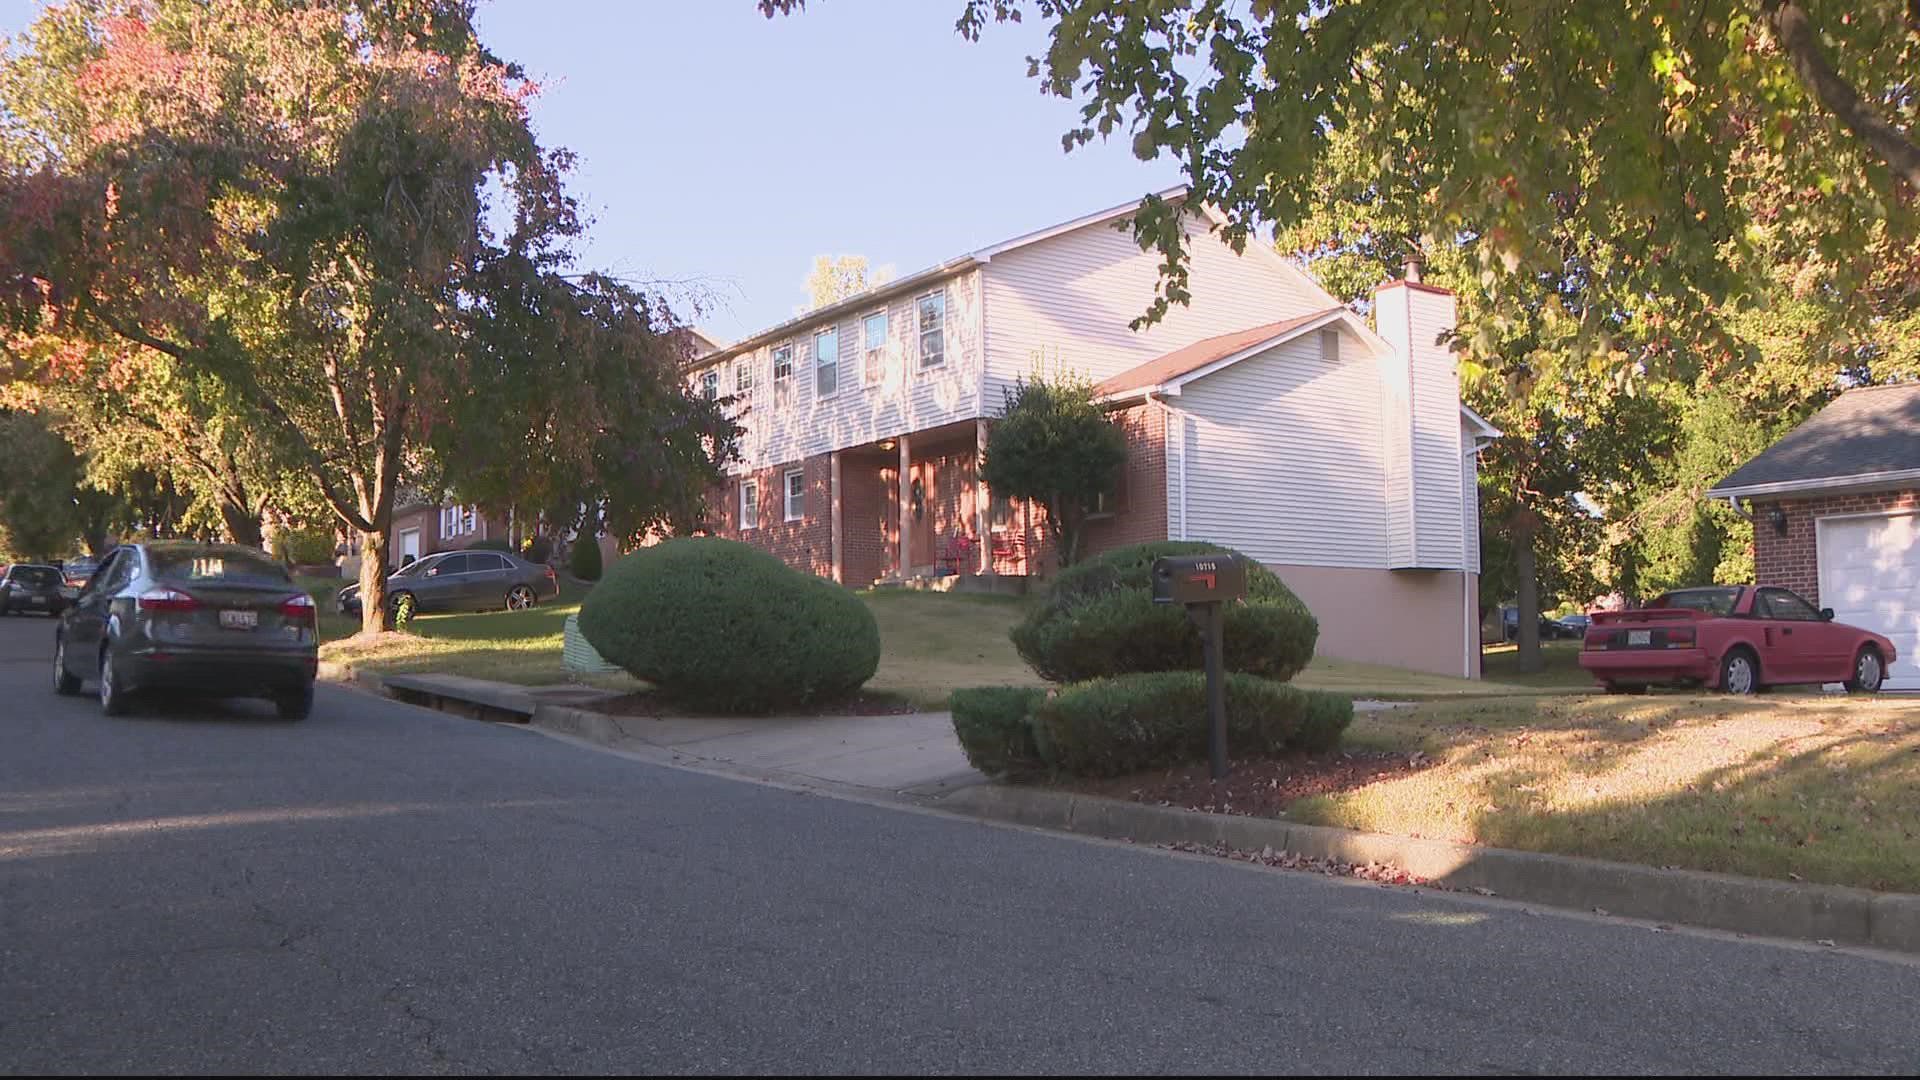 A couple who bought a foreclosed, vacant home in Prince George's County were surprised when they showed up to the house and other people were already moving in.